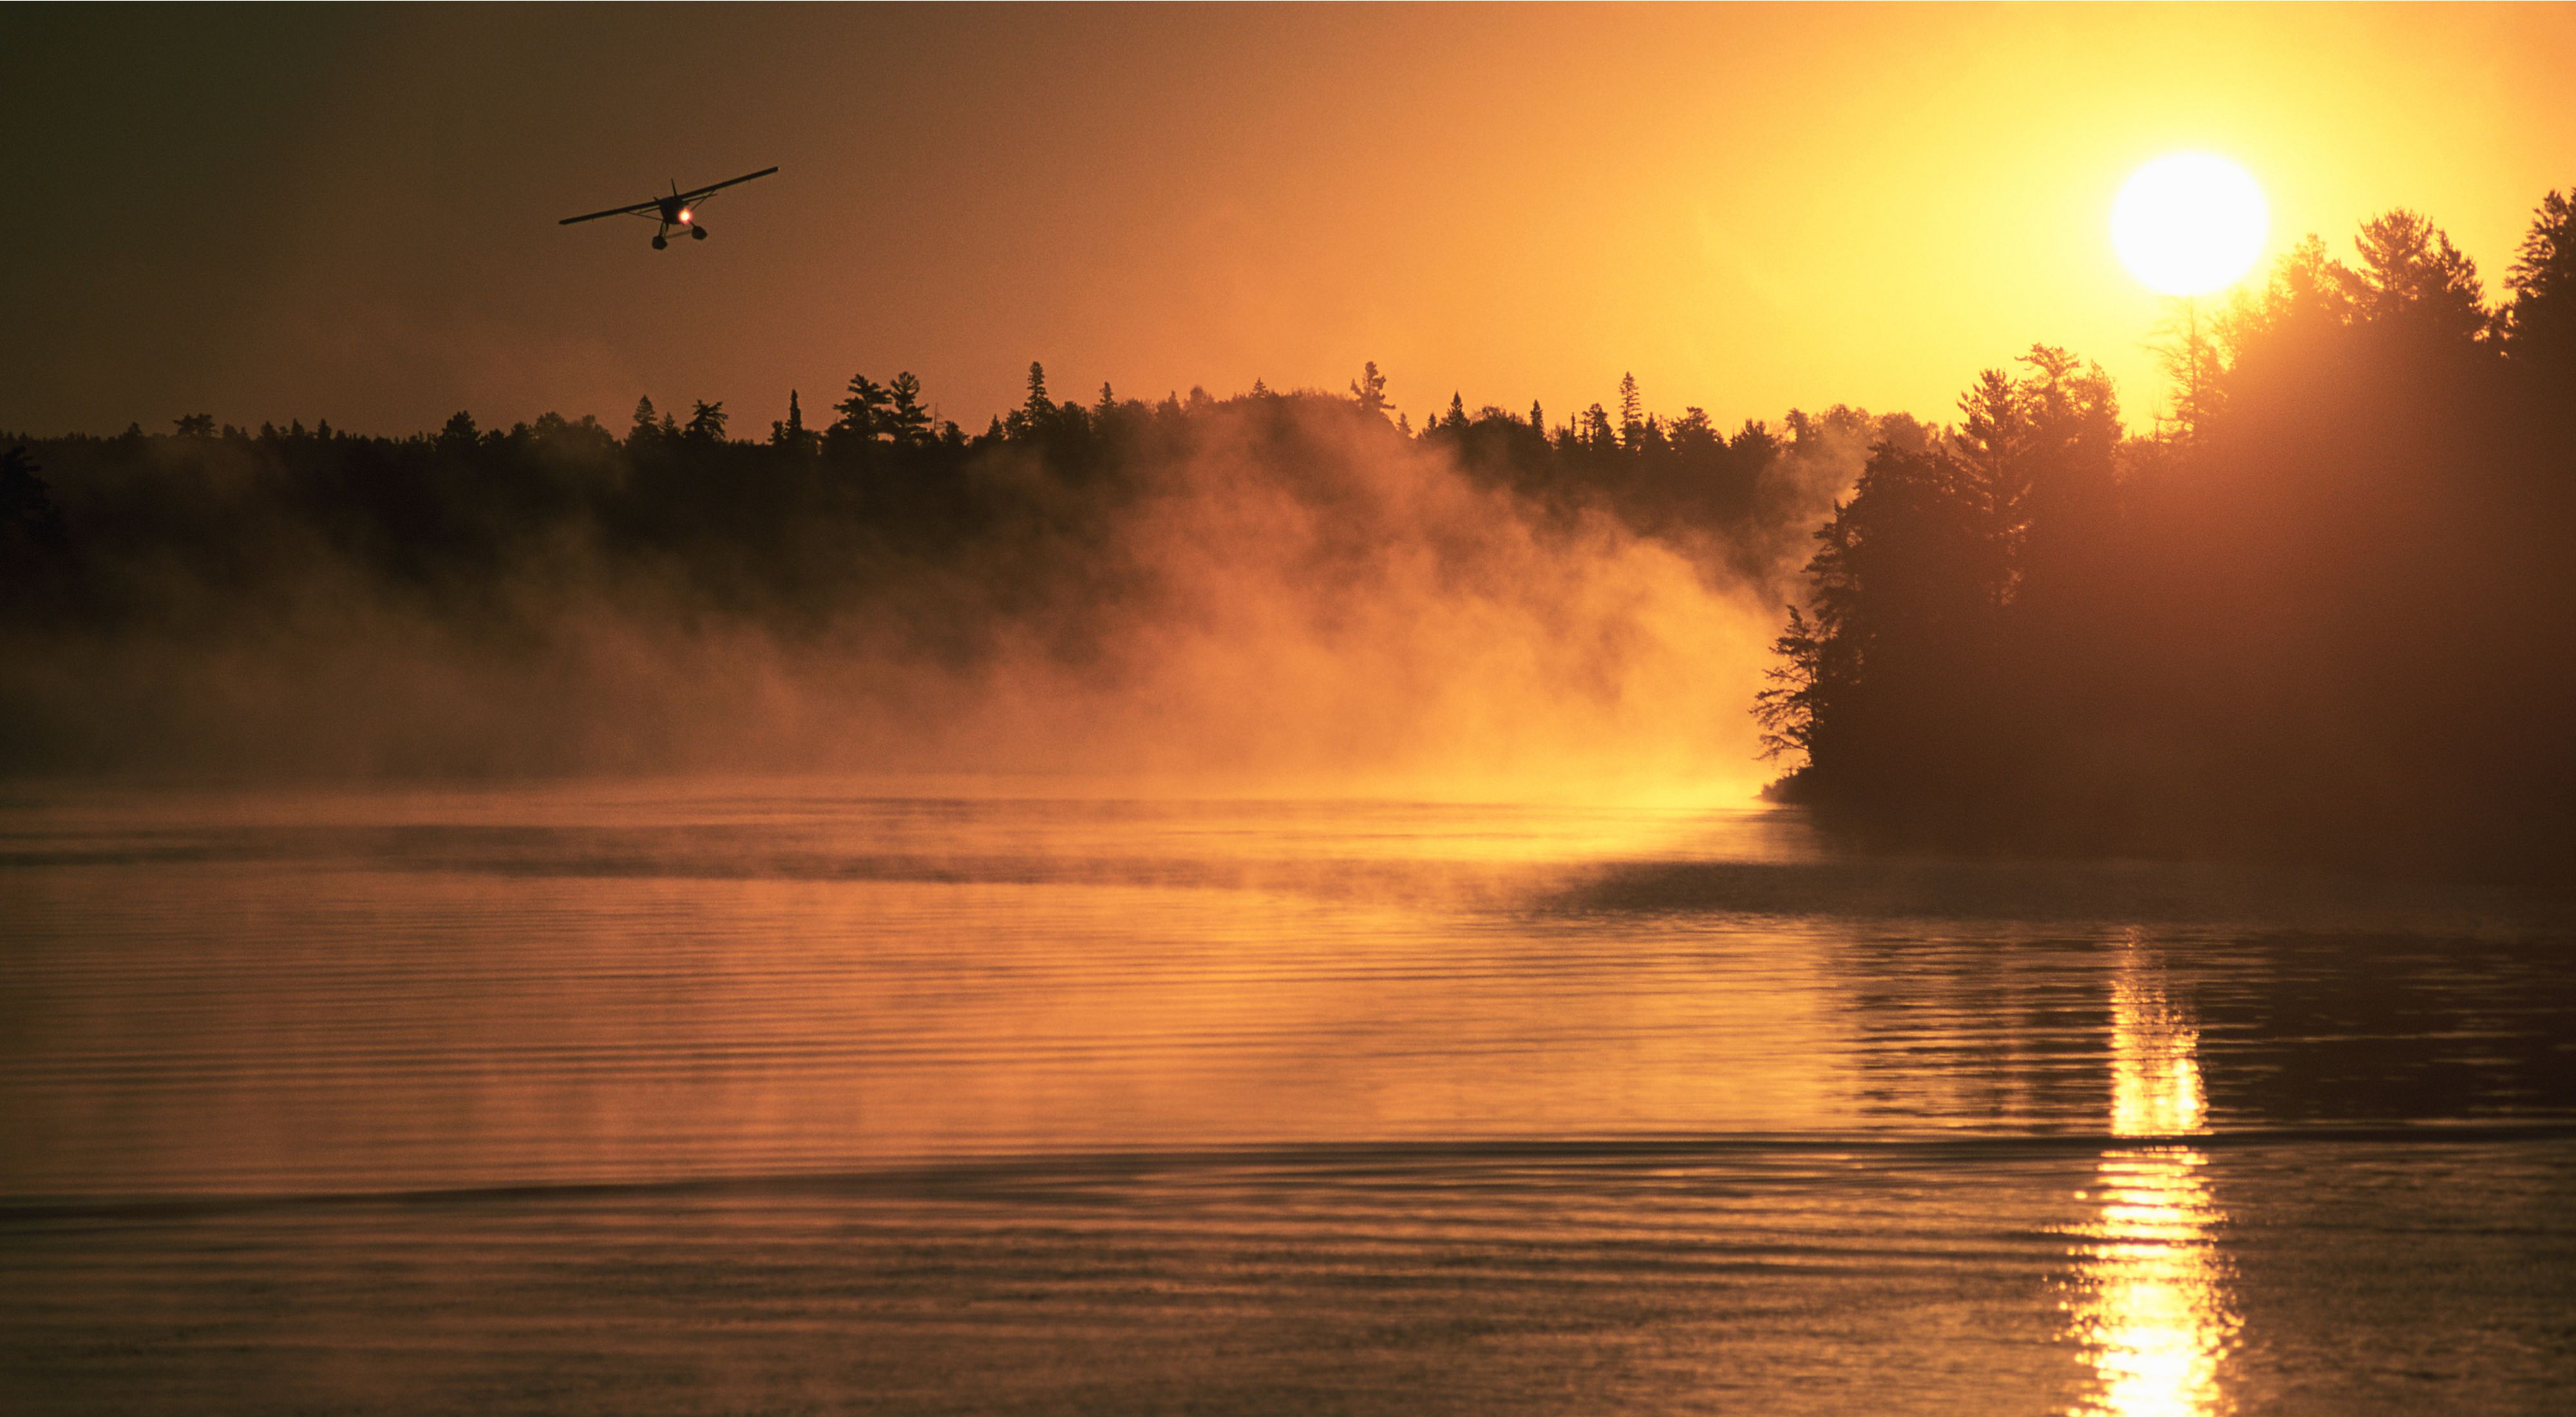 A float plane carrying fishermen departs at dawn from Nestor Falls on one of the many lakes in the Lakes of the Woods region of Ontario Canada.